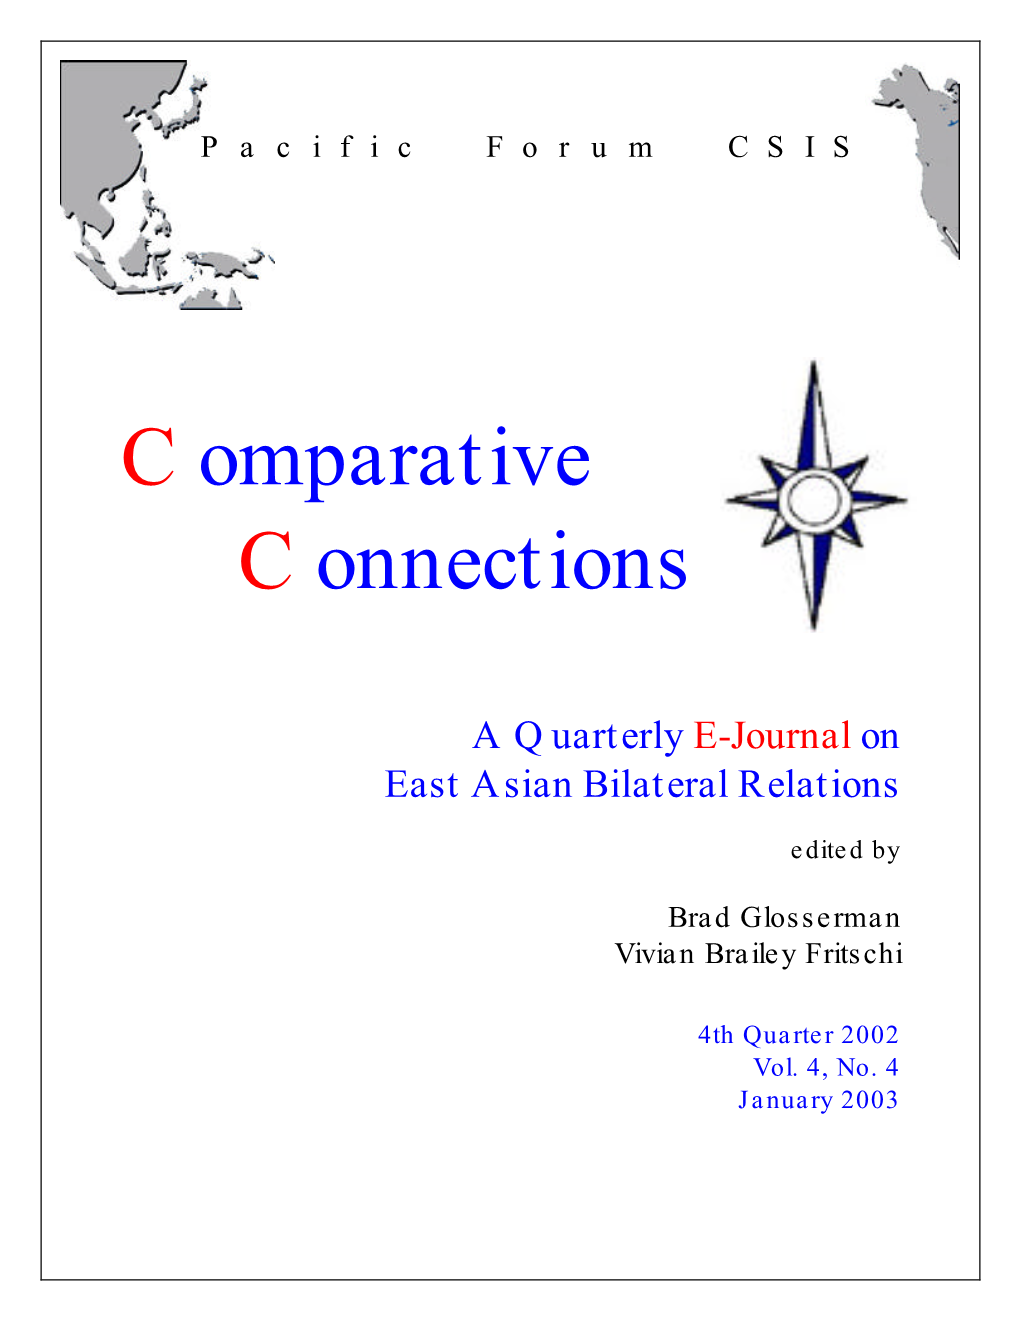 Comparative Connections, Volume 4, Number 4